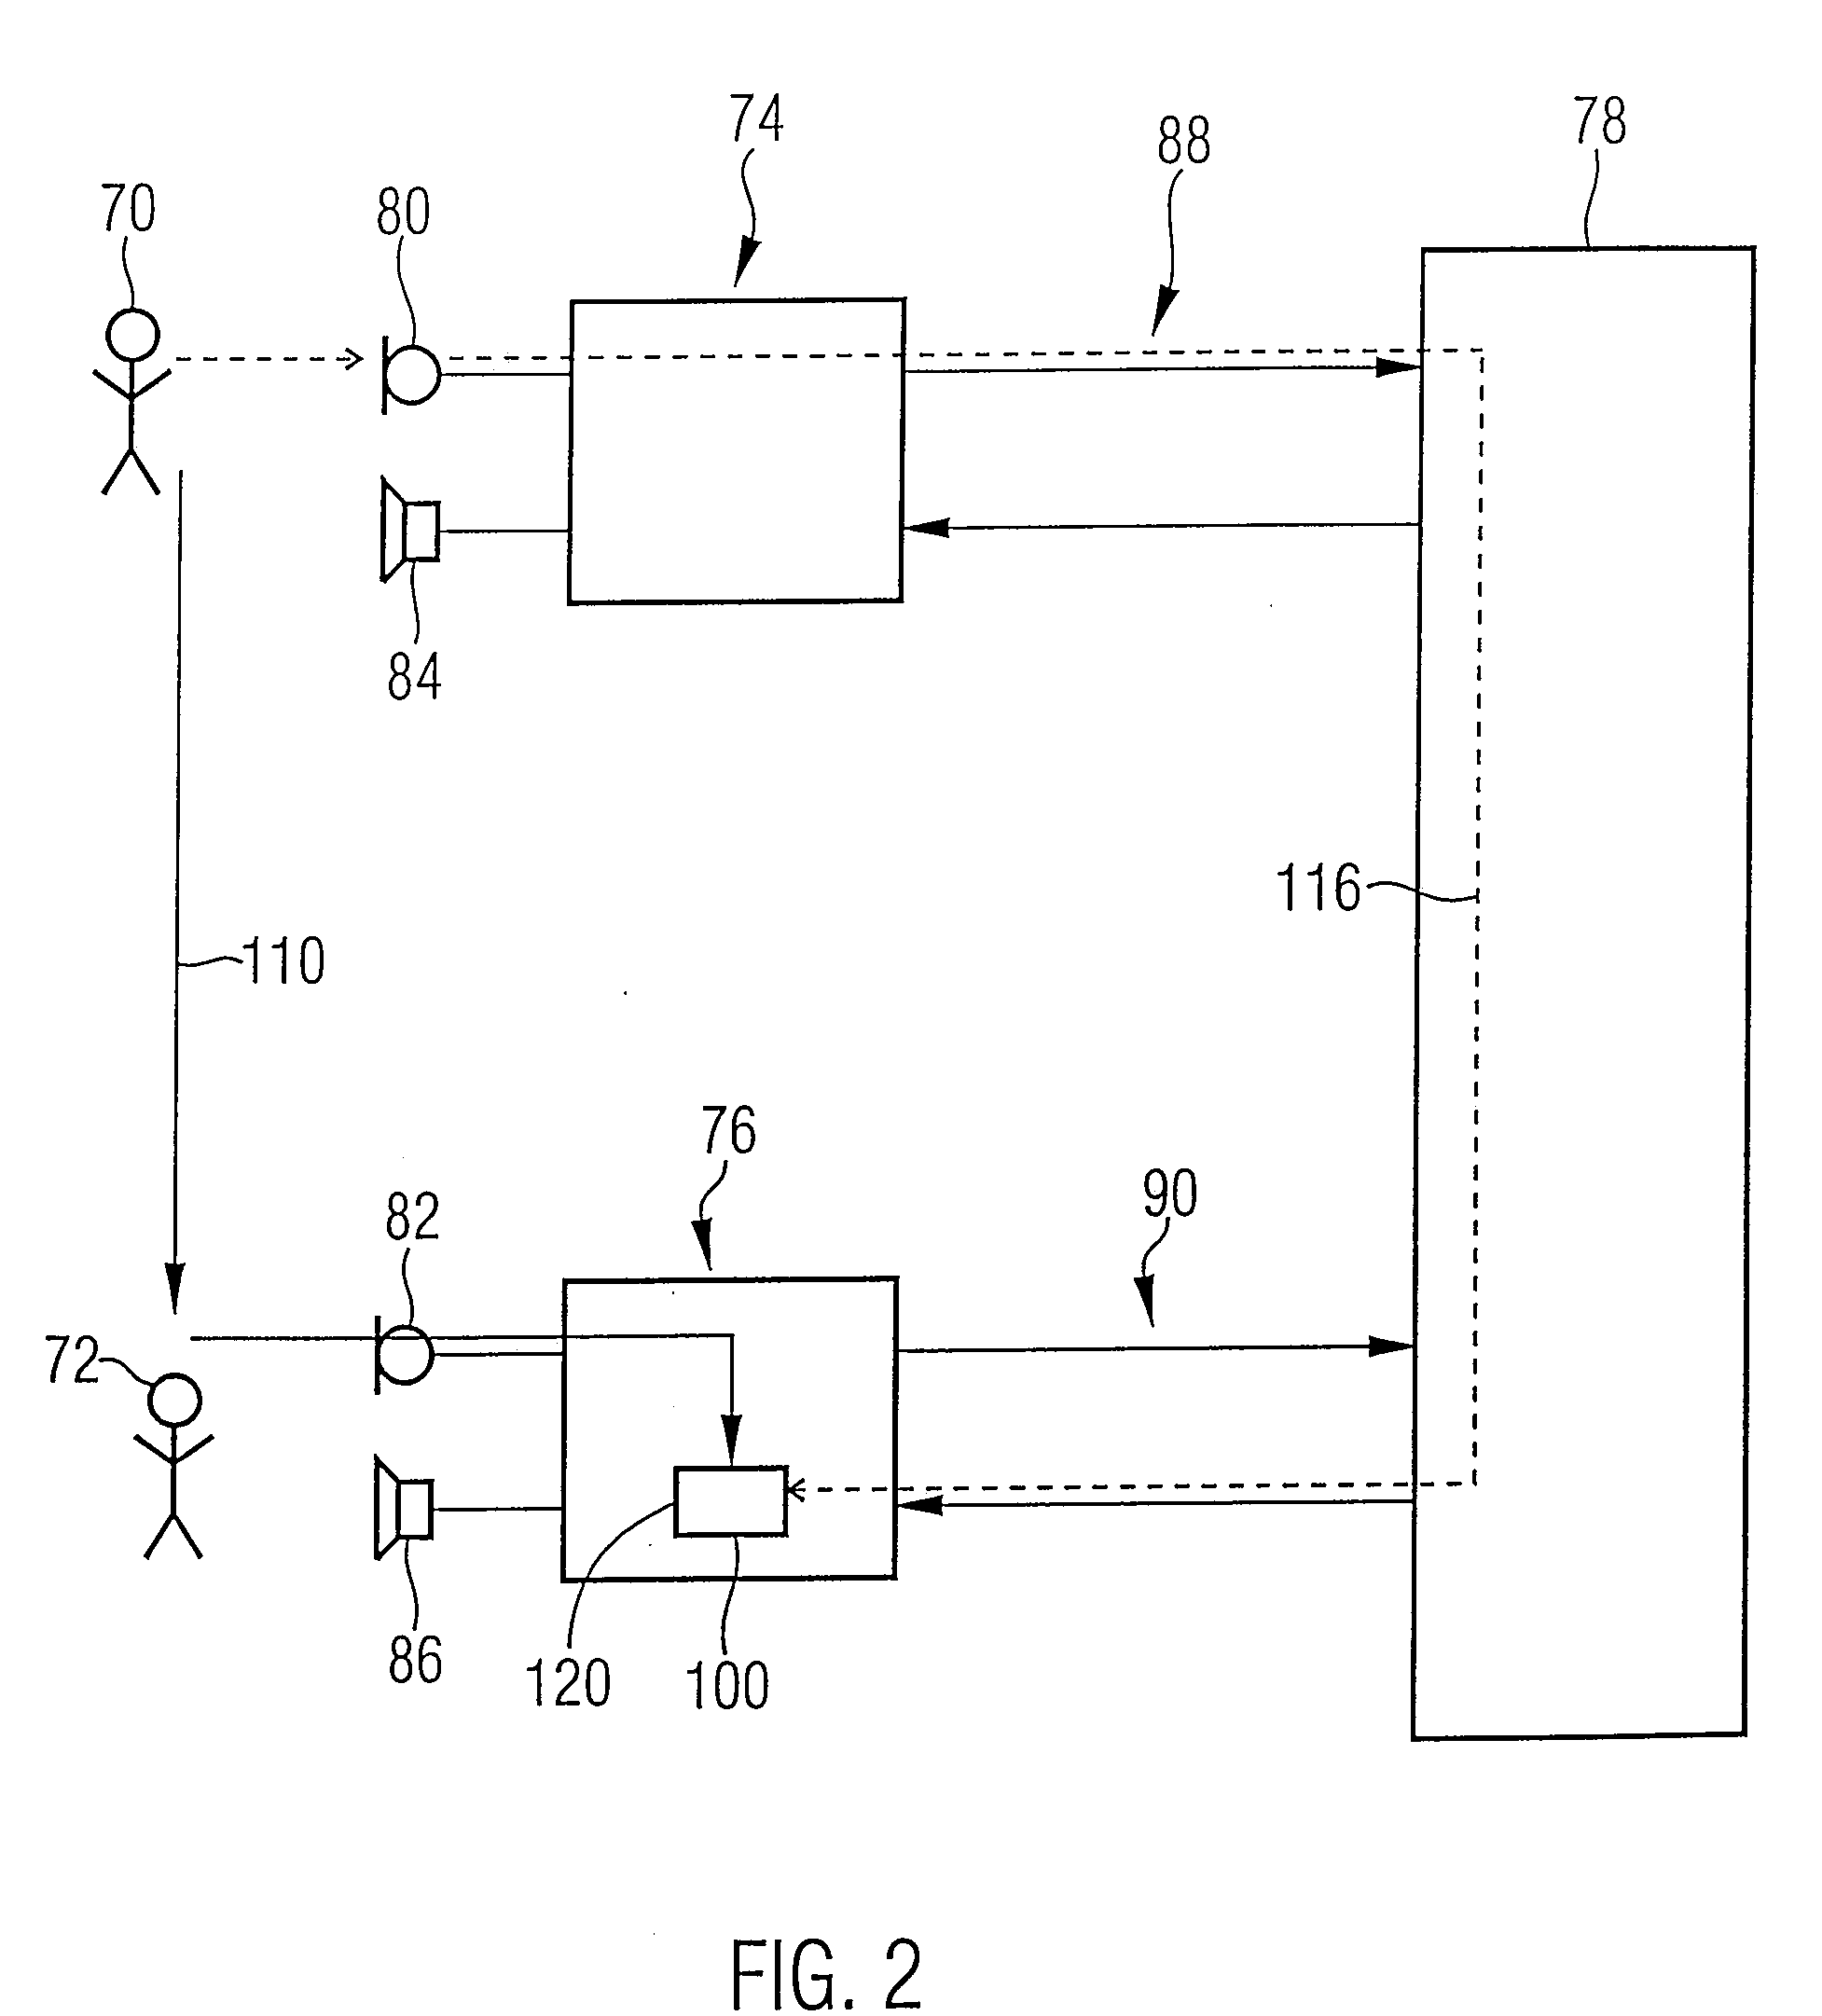 Conference terminal with echo reduction for a voice conference system